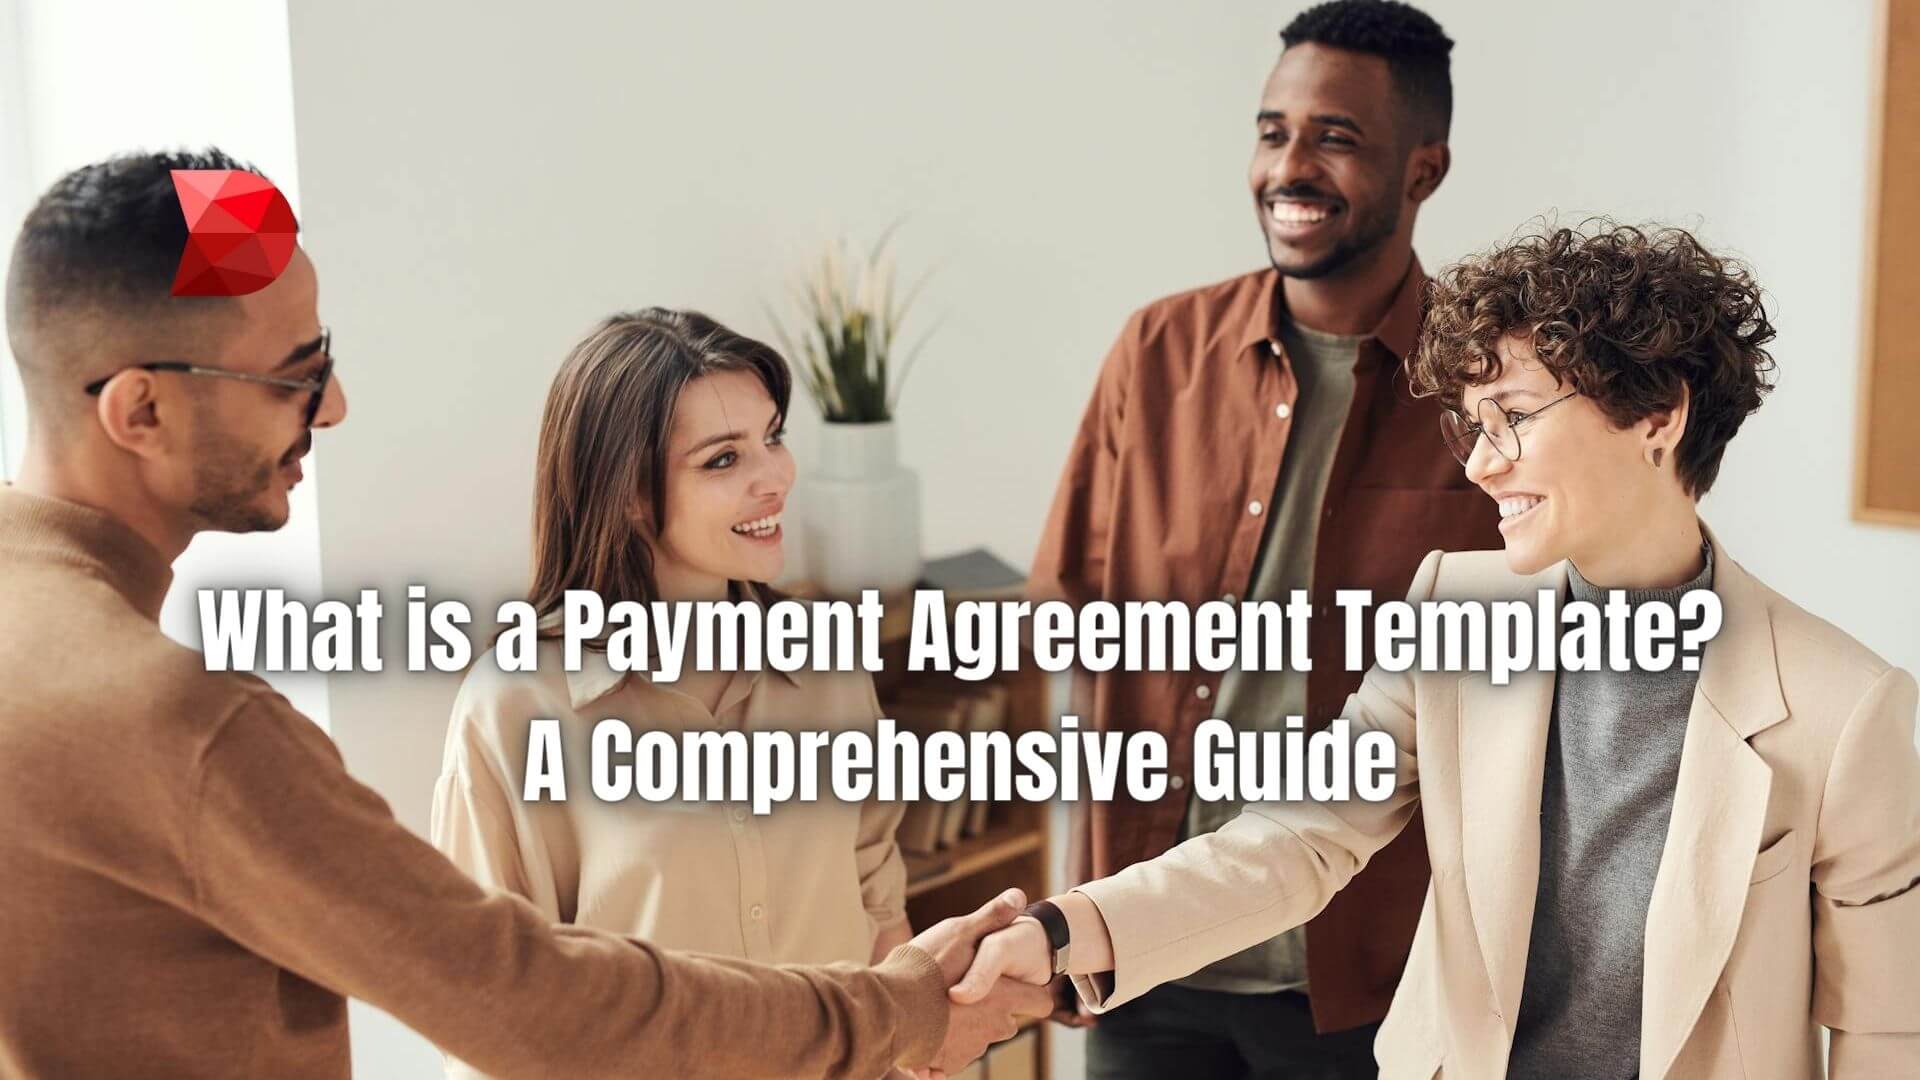 Simplify your contract process today! Click here to learn how to create effective payment agreement templates with our comprehensive guide.